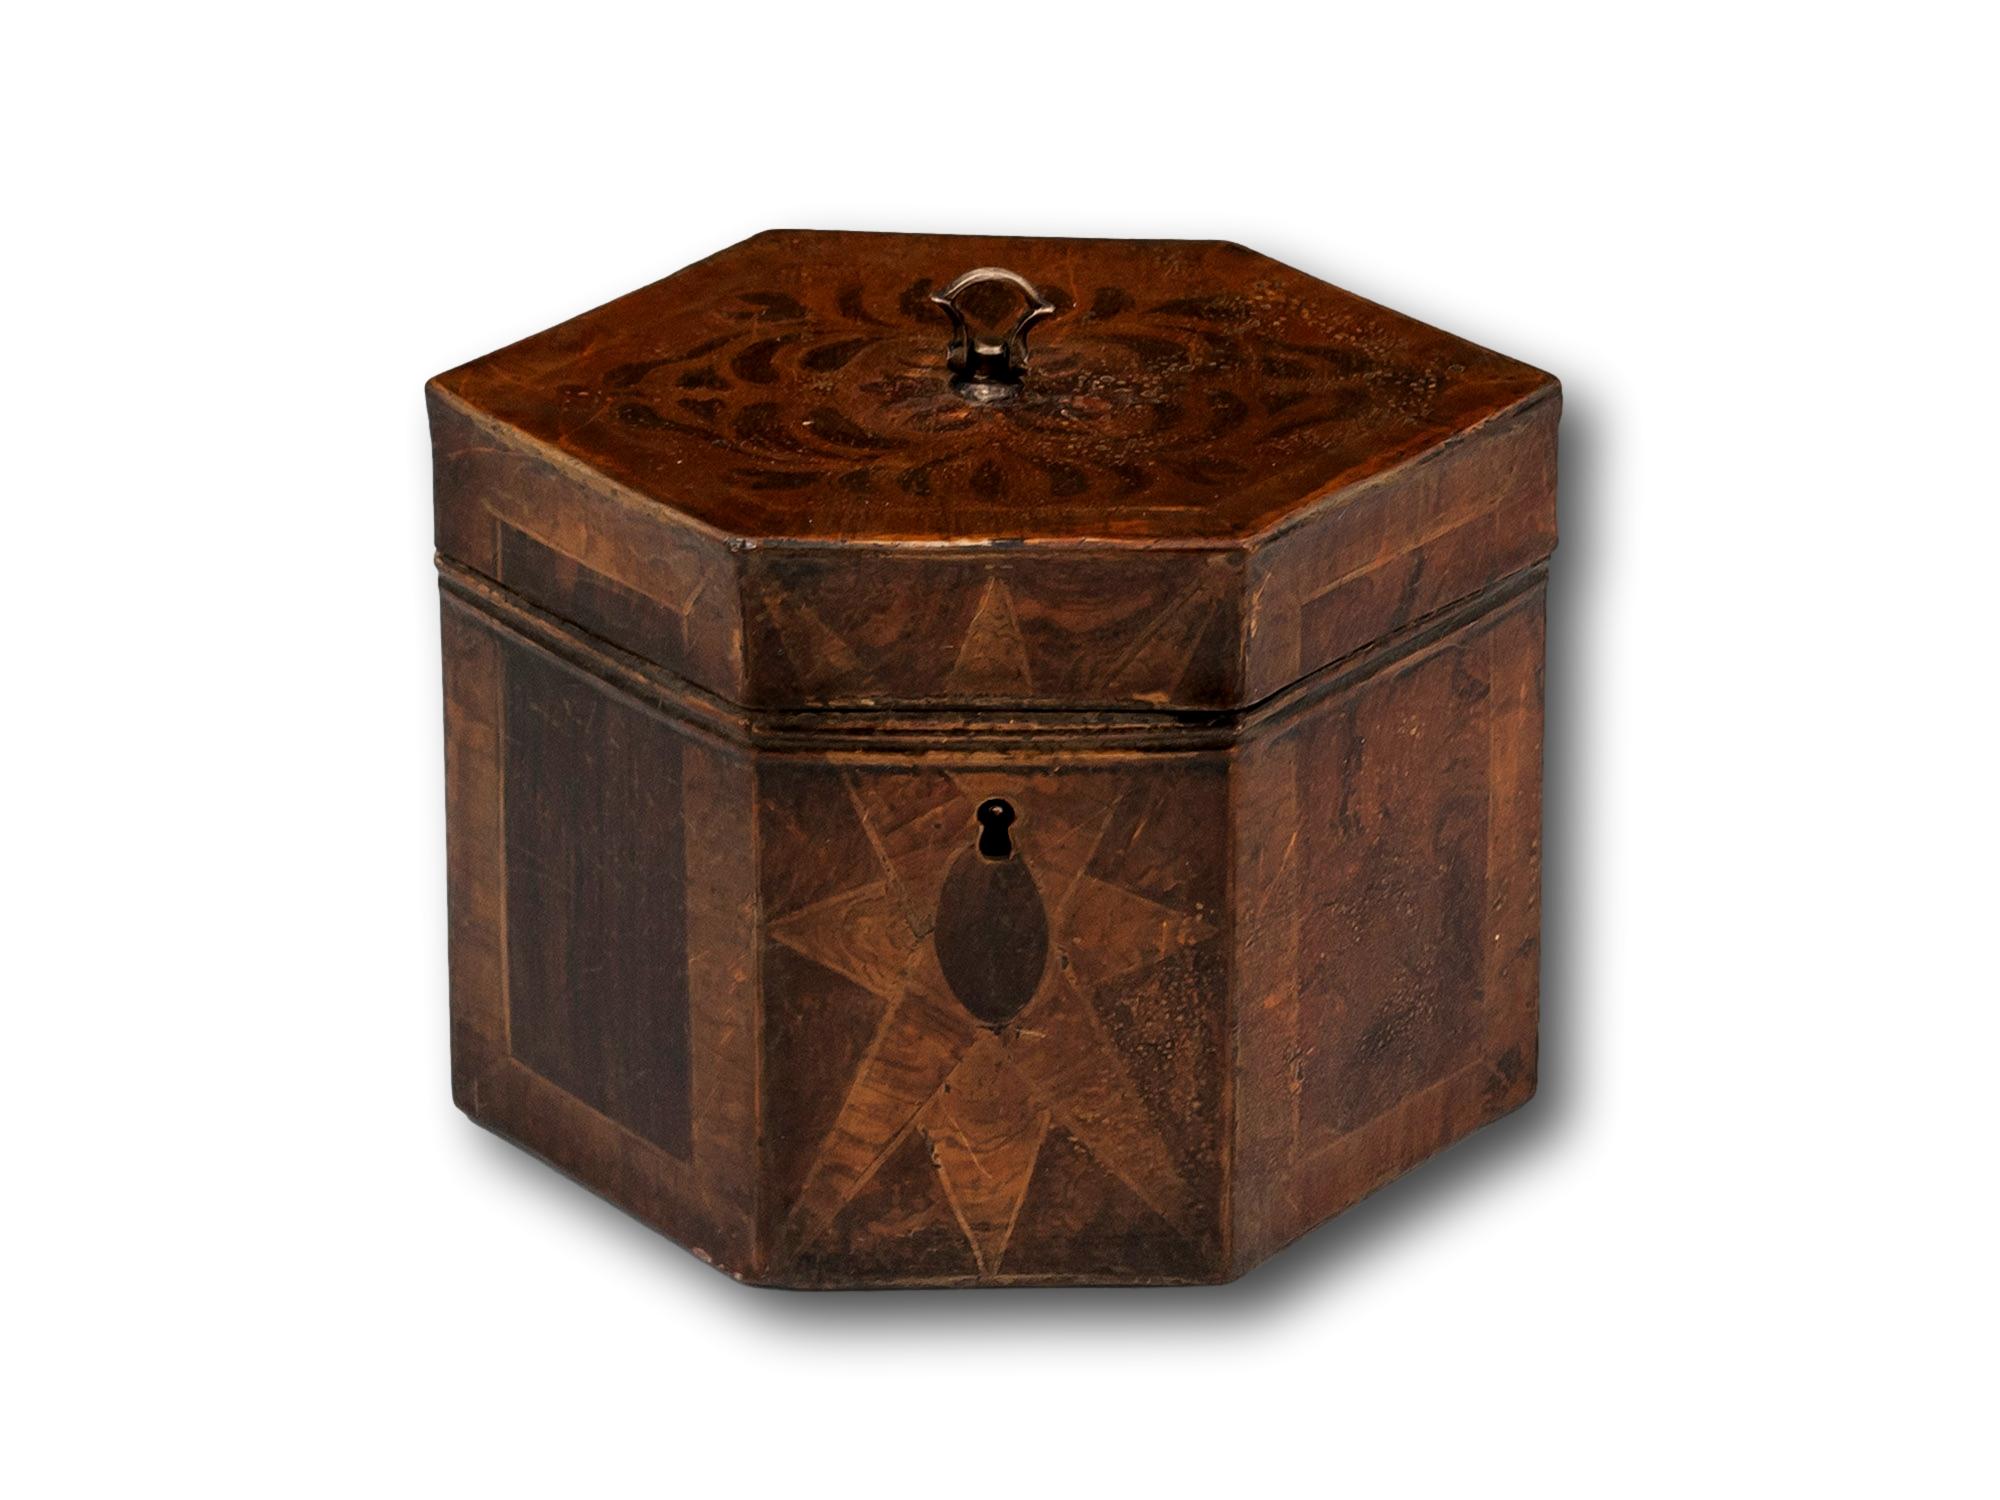 Simulated Wood Tin Tea Caddy 

From our Tea Caddy collection, we are delighted to offer this Tinware Tea Caddy. The Caddy of hexagonal shape fully hand-painted with a simulated wood design displaying various methods including simulated inlay and